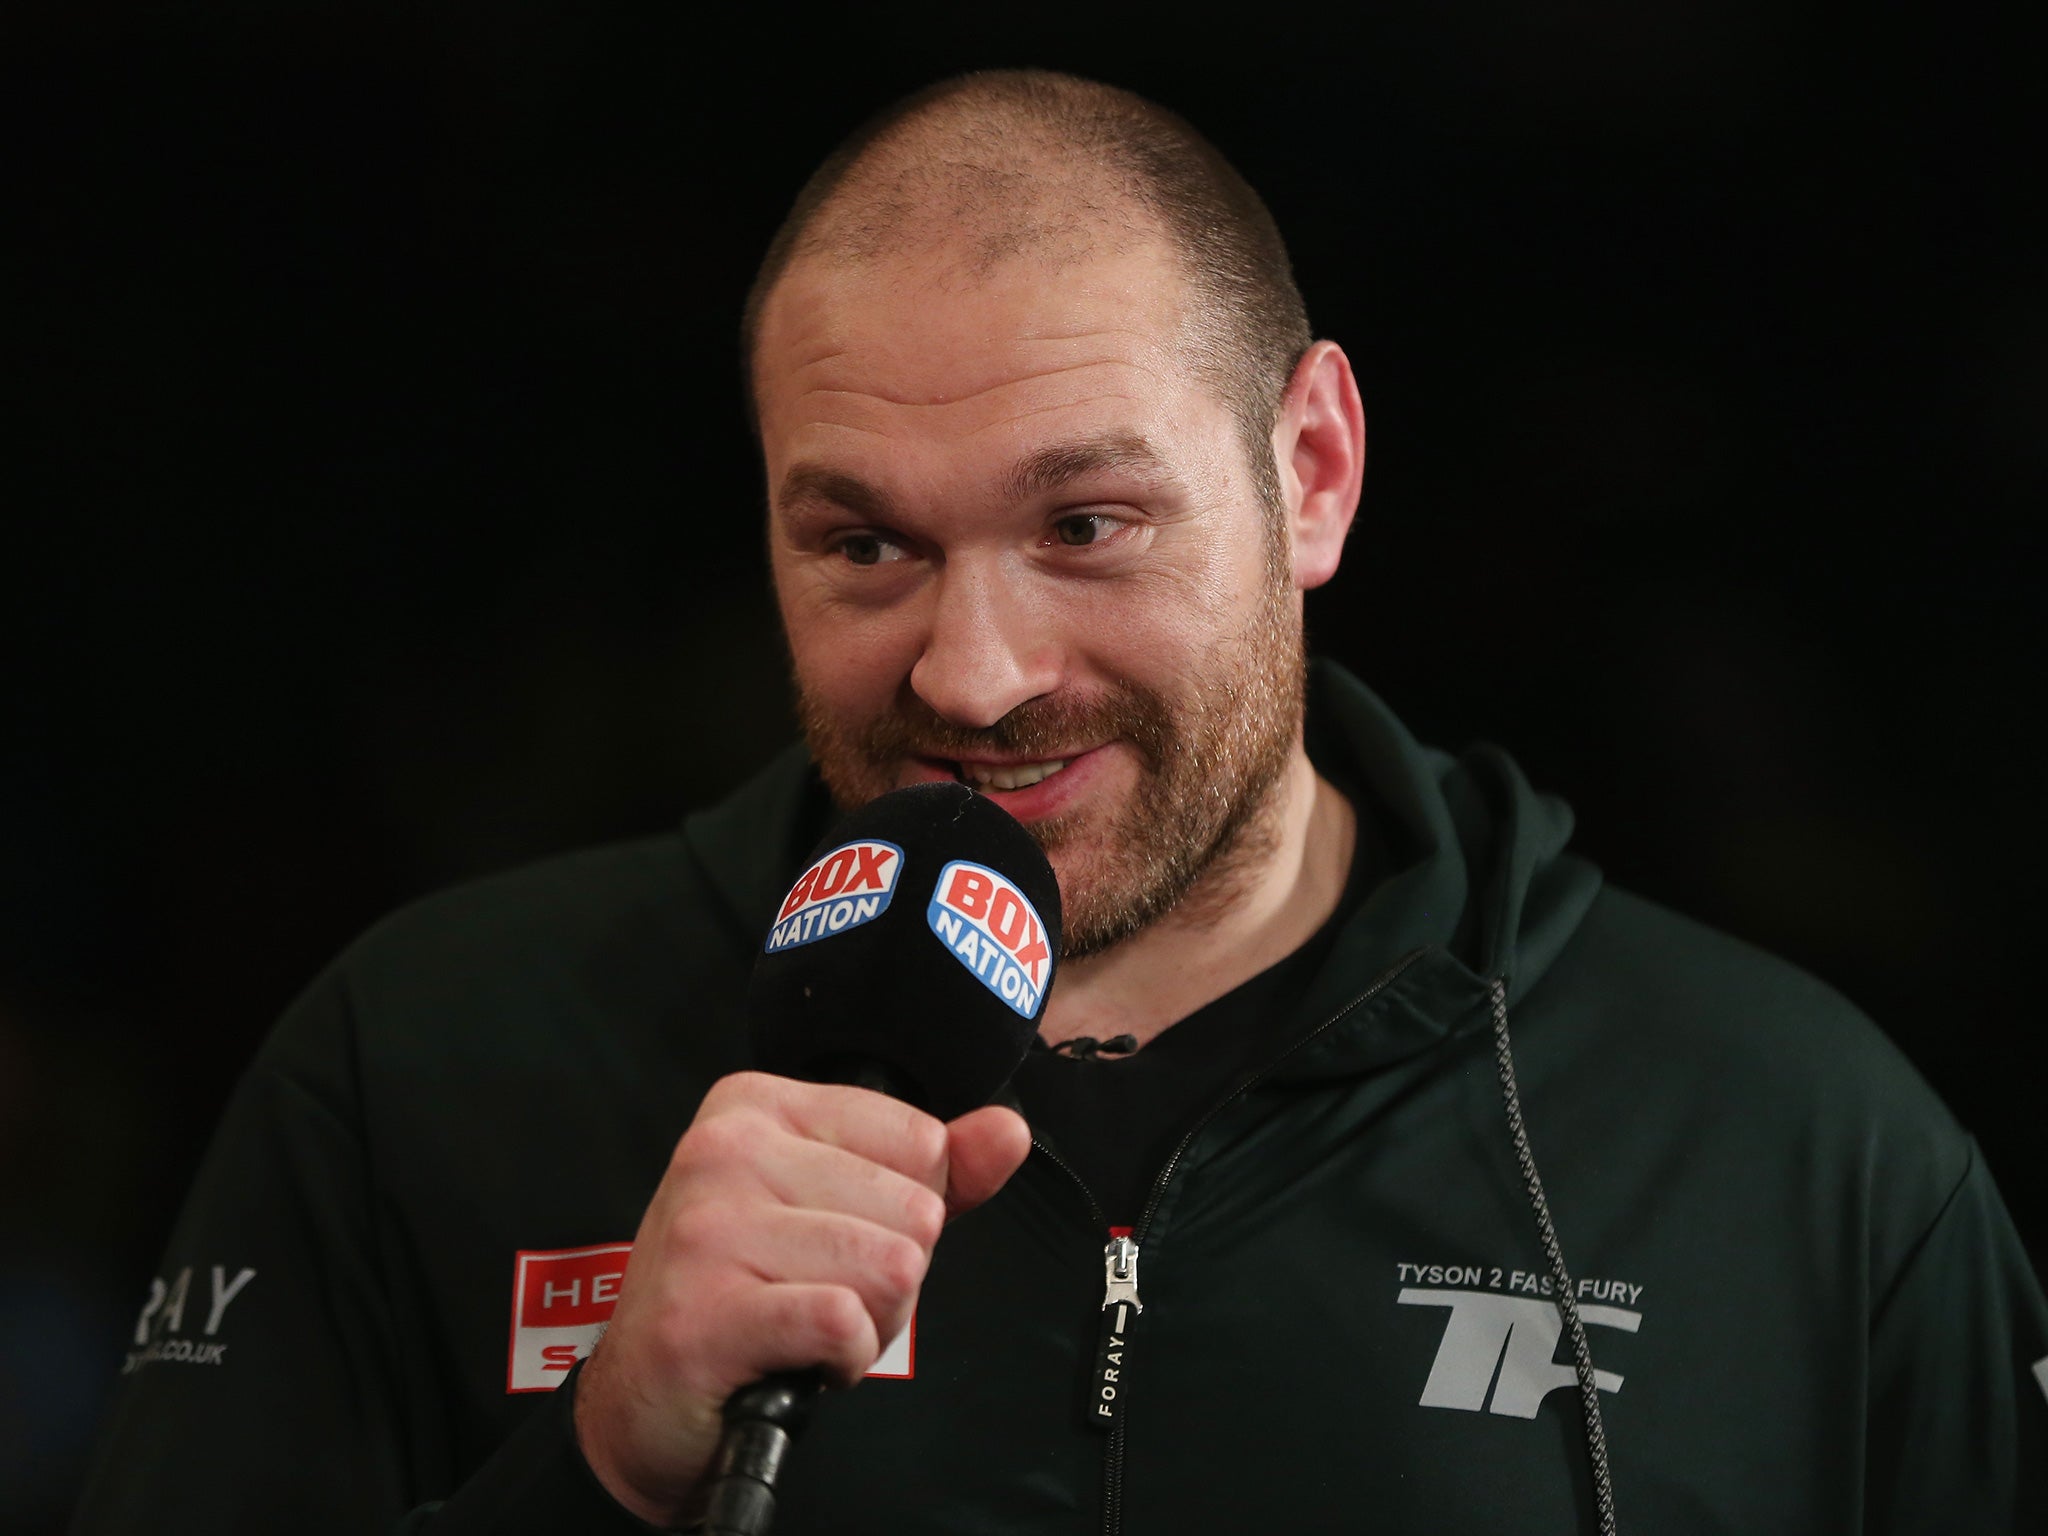 Fury withdrew from next month's rematch with Kitschko for health reasons